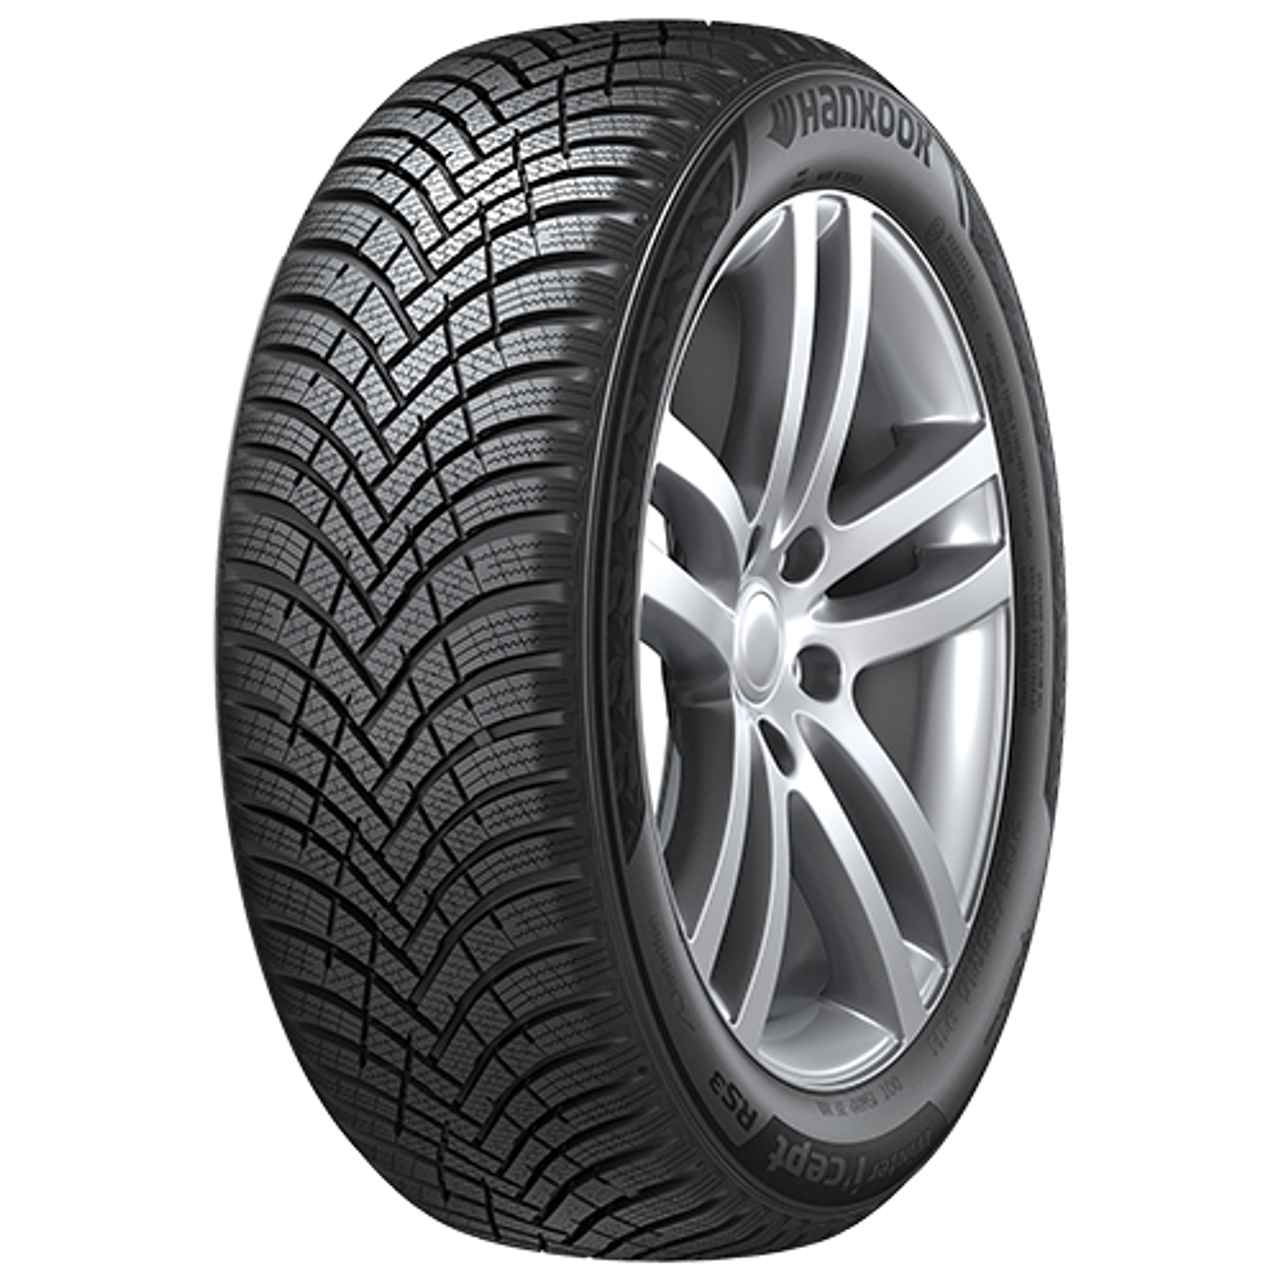 HANKOOK WINTER I*CEPT RS3 185/65R15 88T BSW